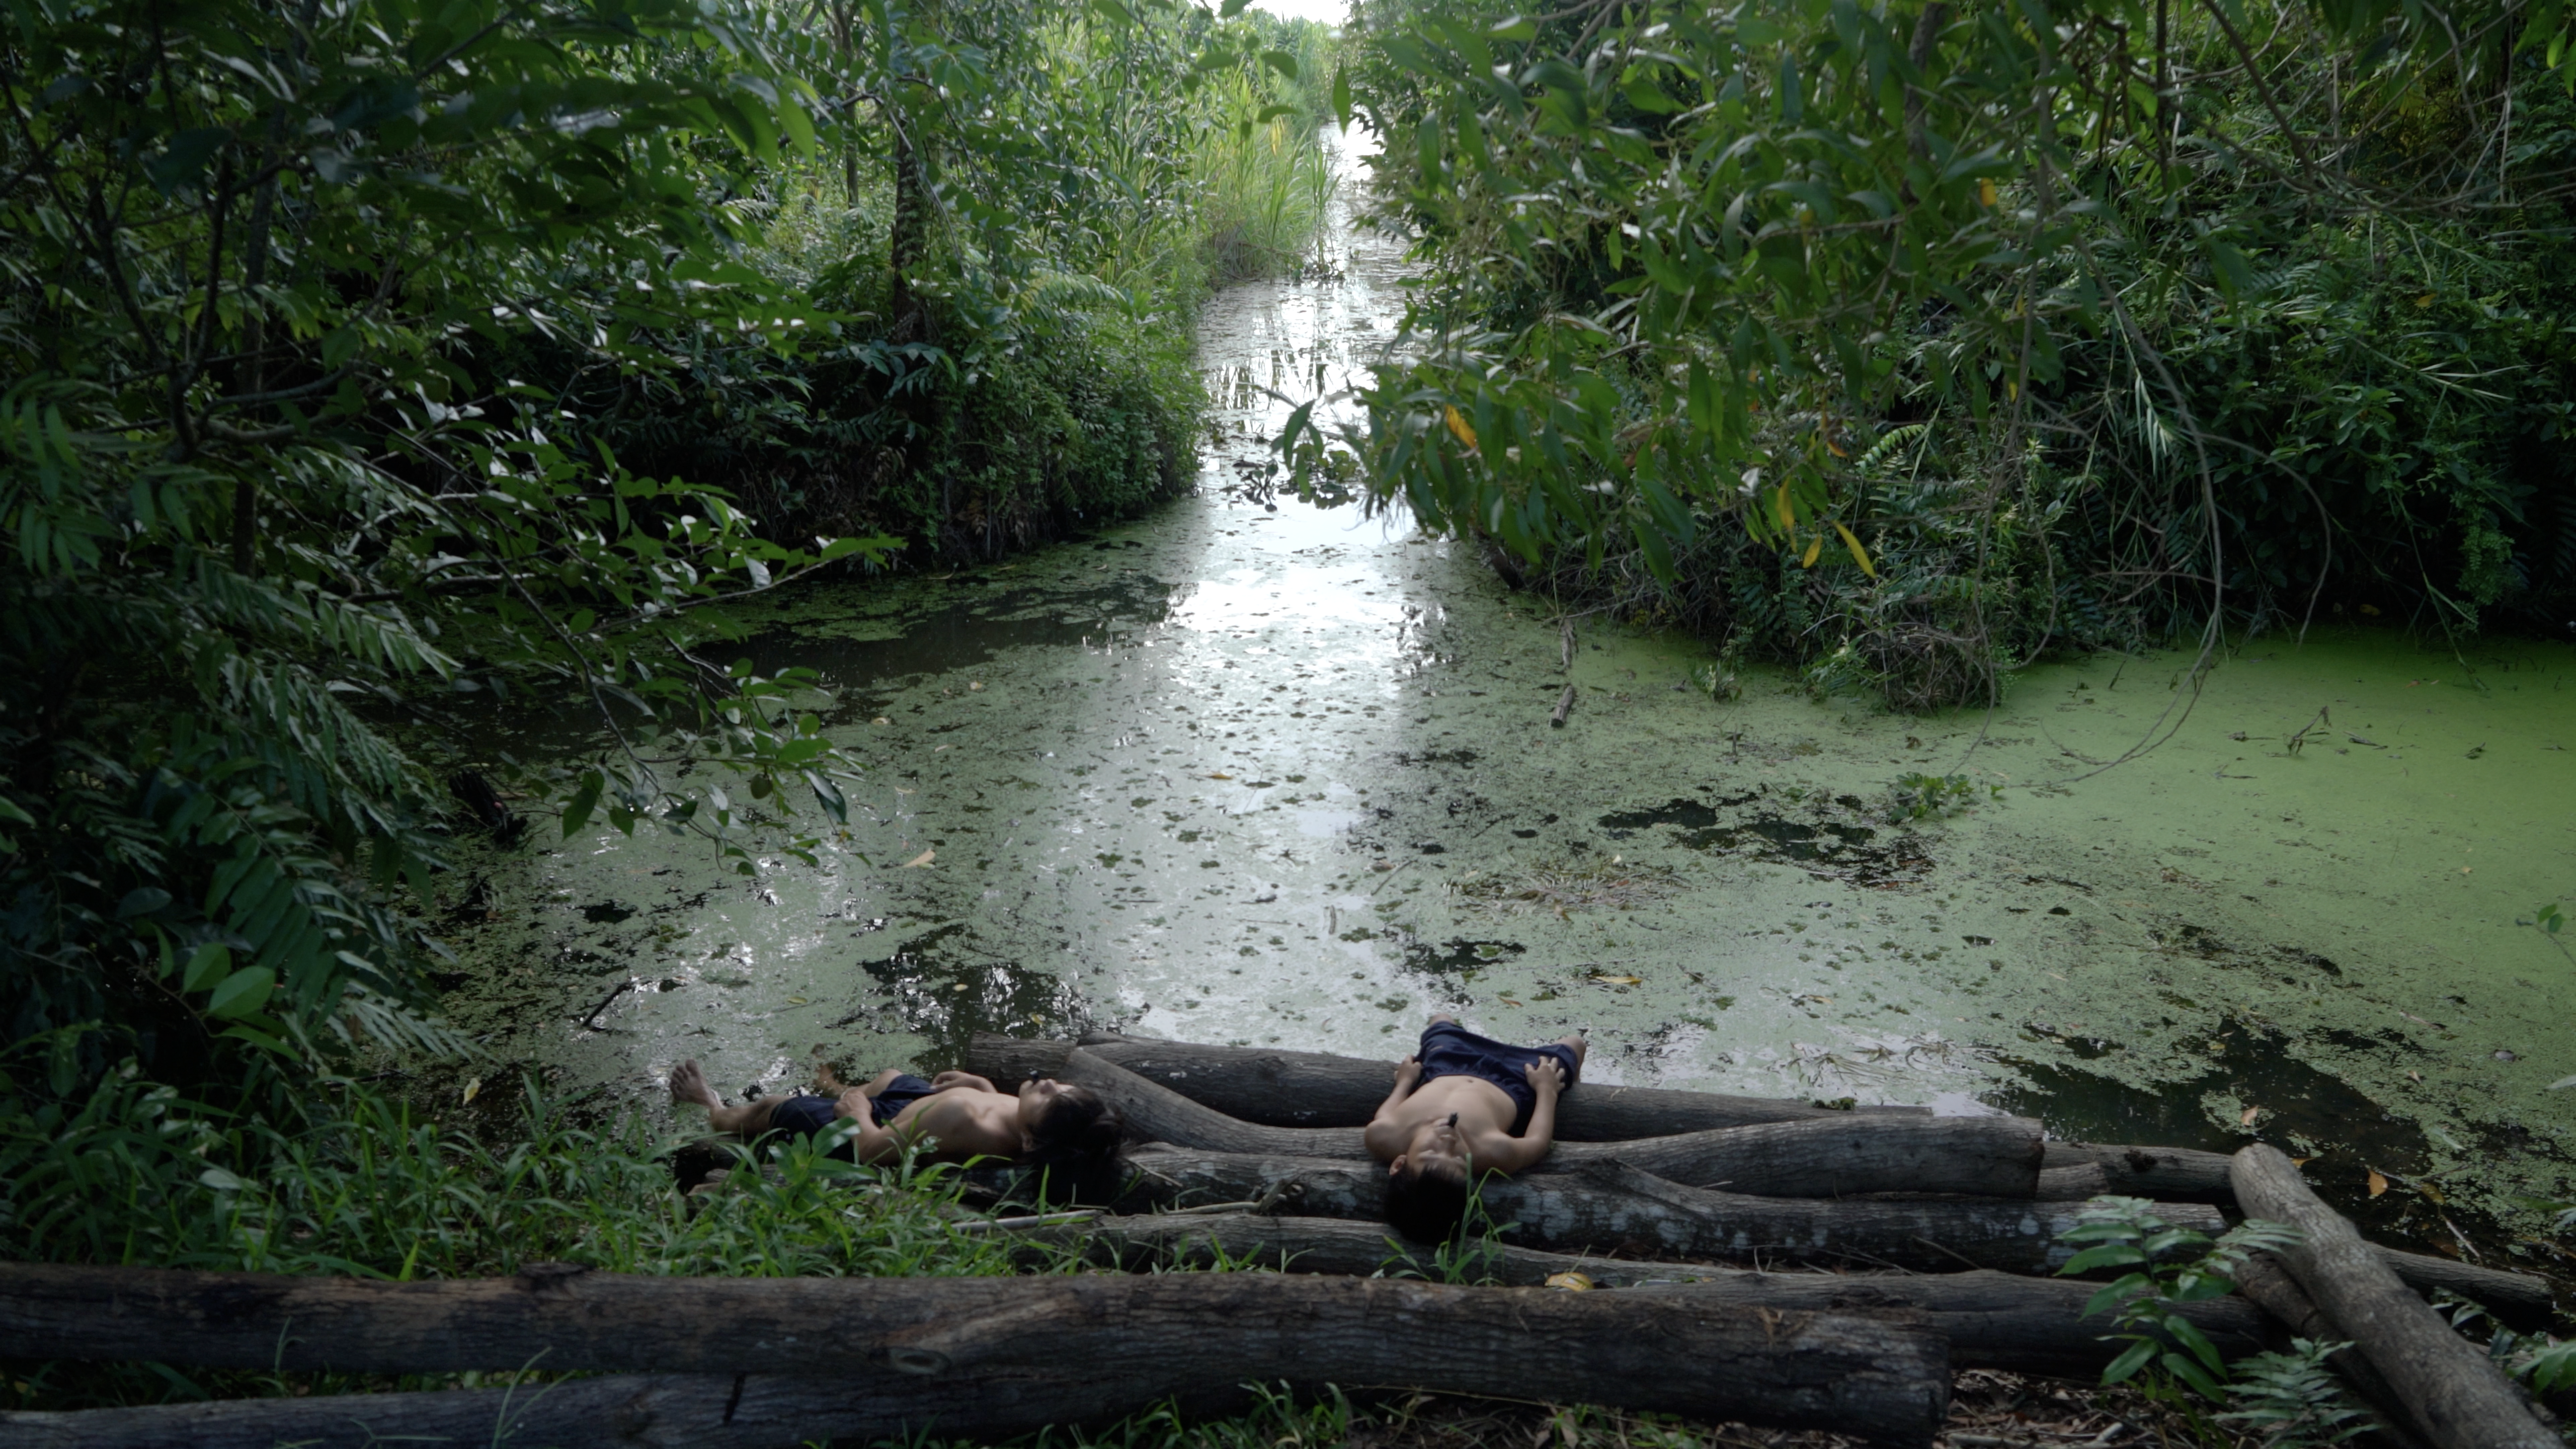 Two young shirtless boys recline across logs at the edge of a river surrounded by shadowy trees